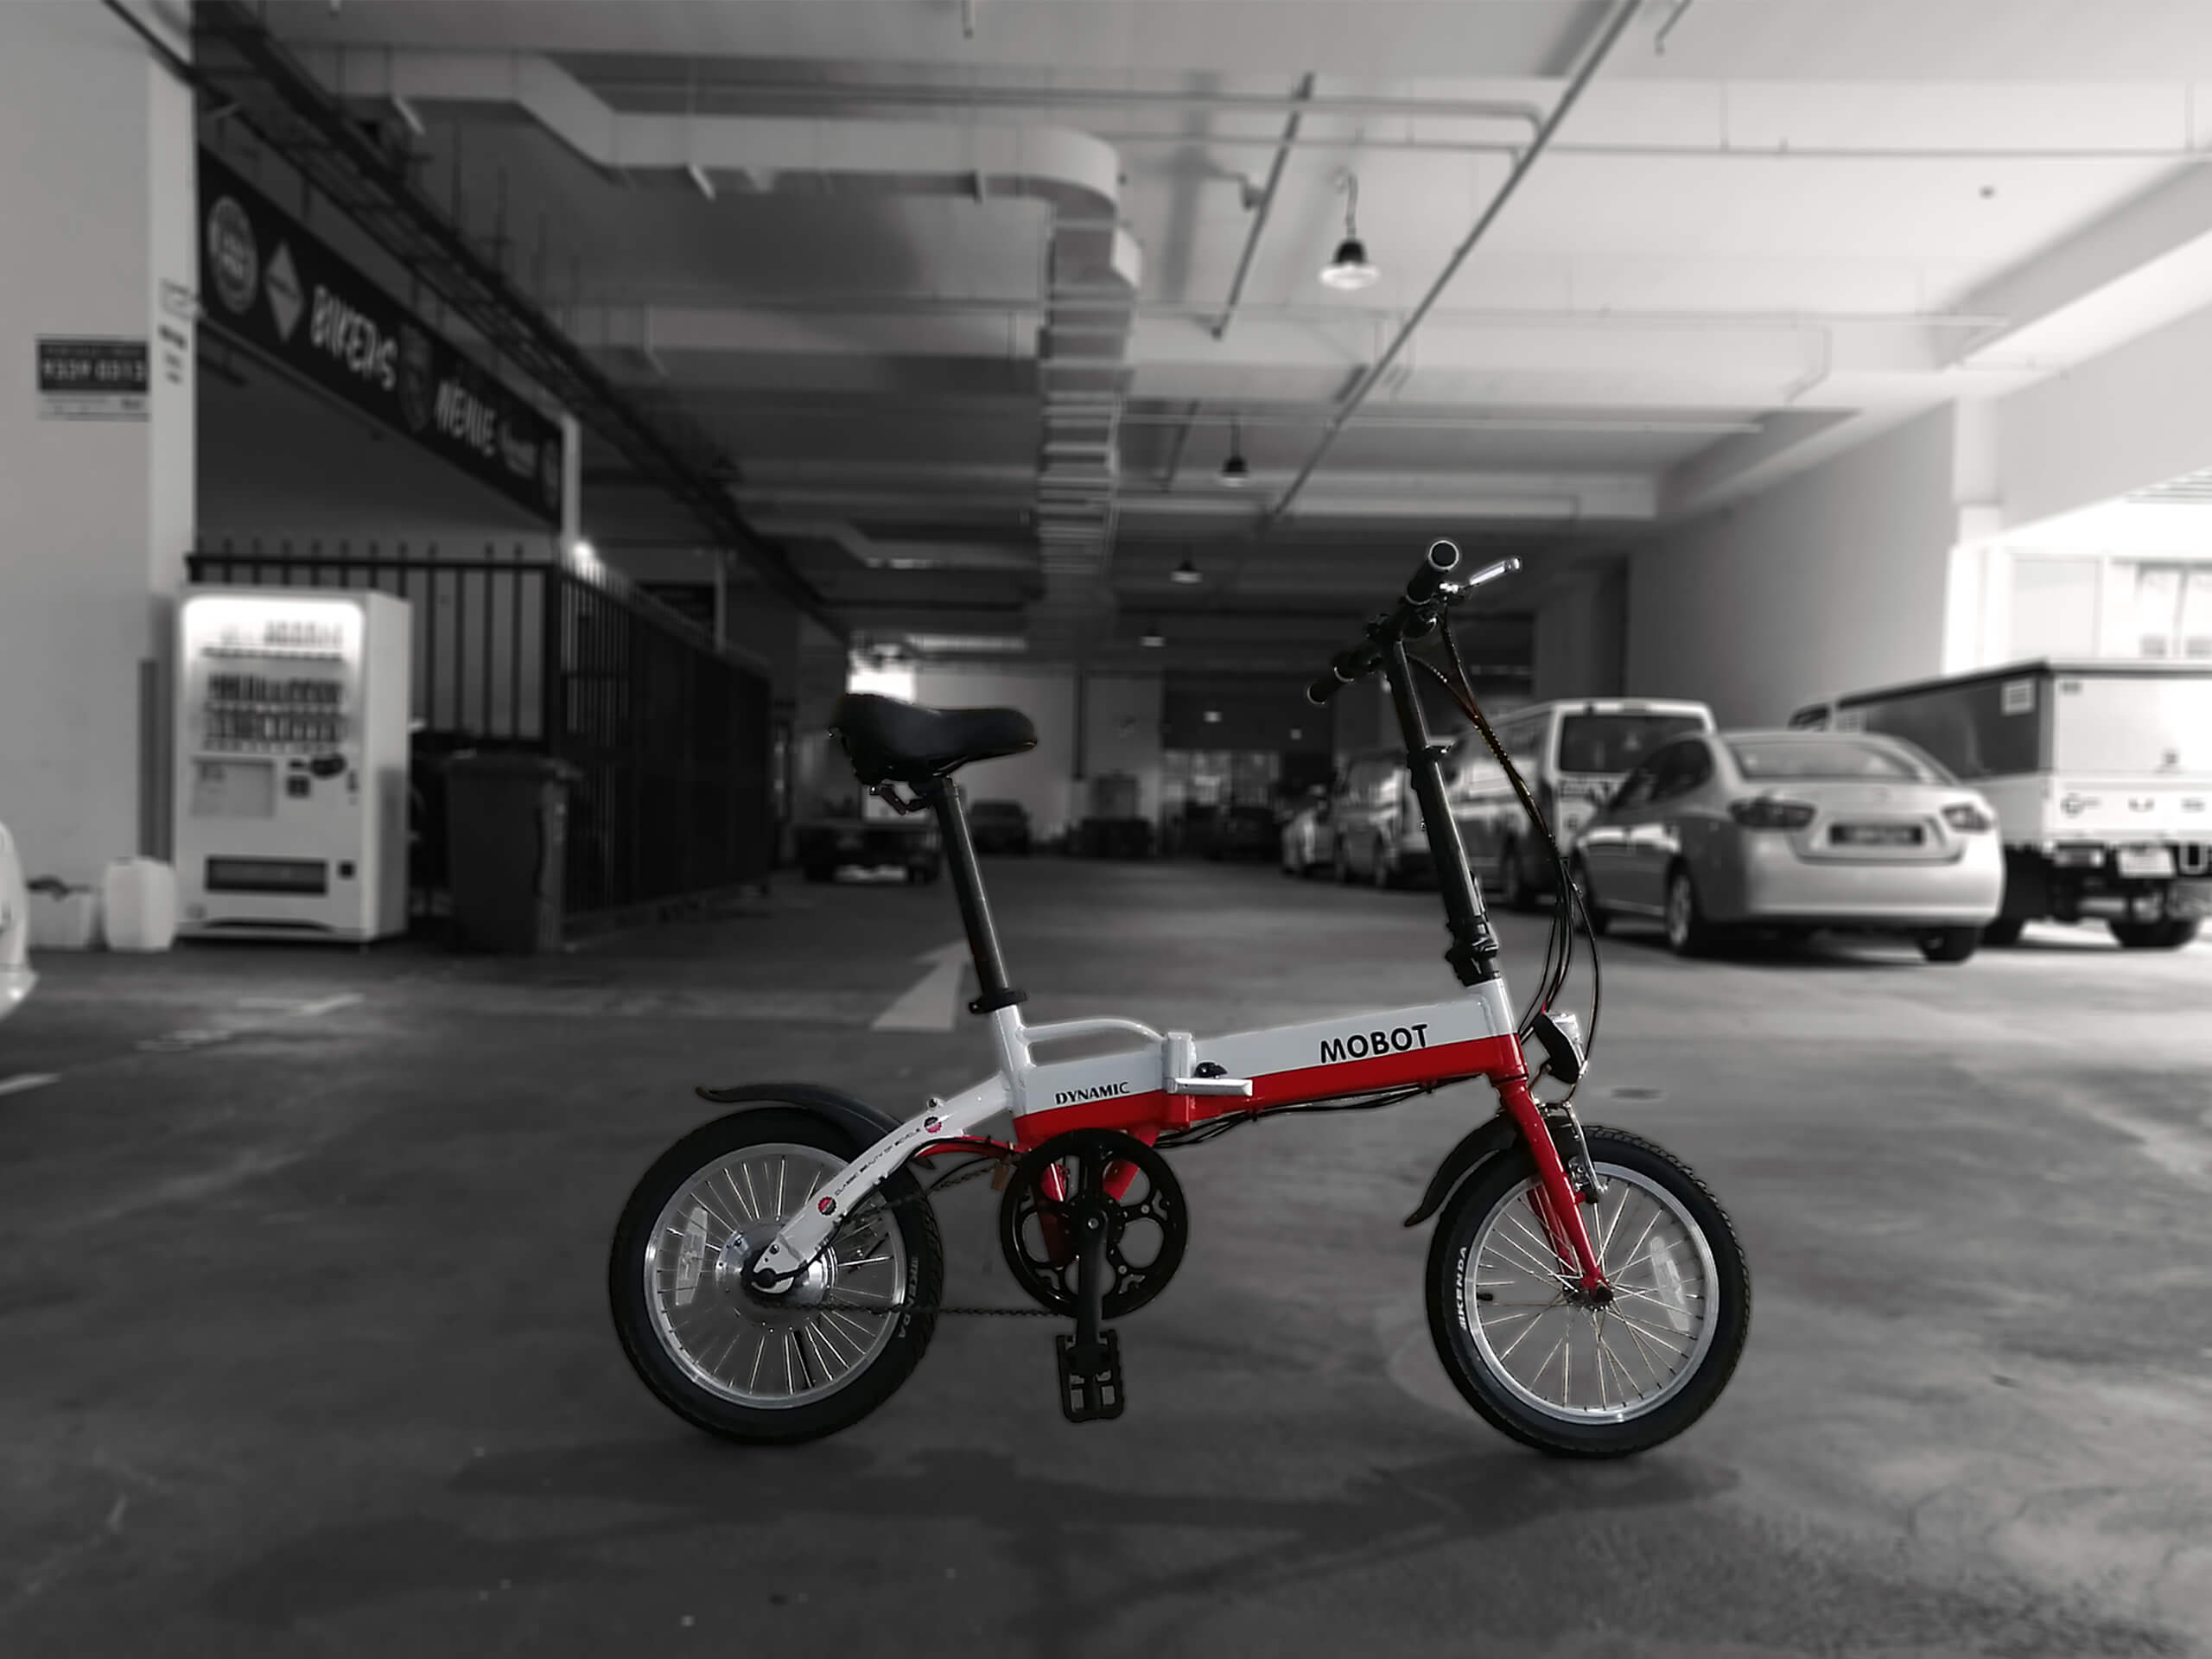 MOBOT MINI 16 RED LTA approved ebike at WCEGA Plaza - Is ebike the future of cycling?